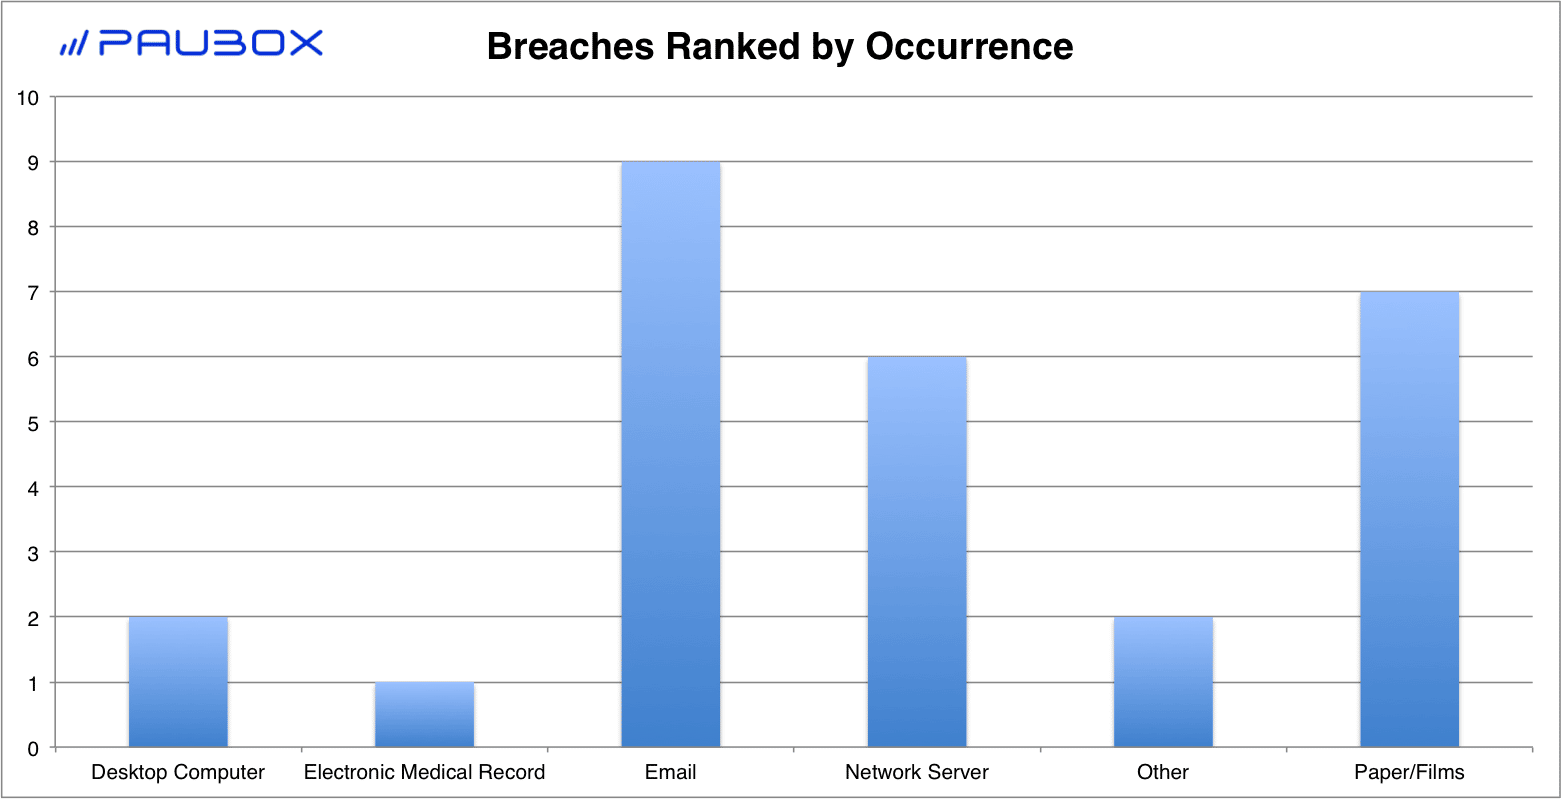 Paubox HIPAA Breach Report: June 2018 - Breaches Ranked by Occurrence